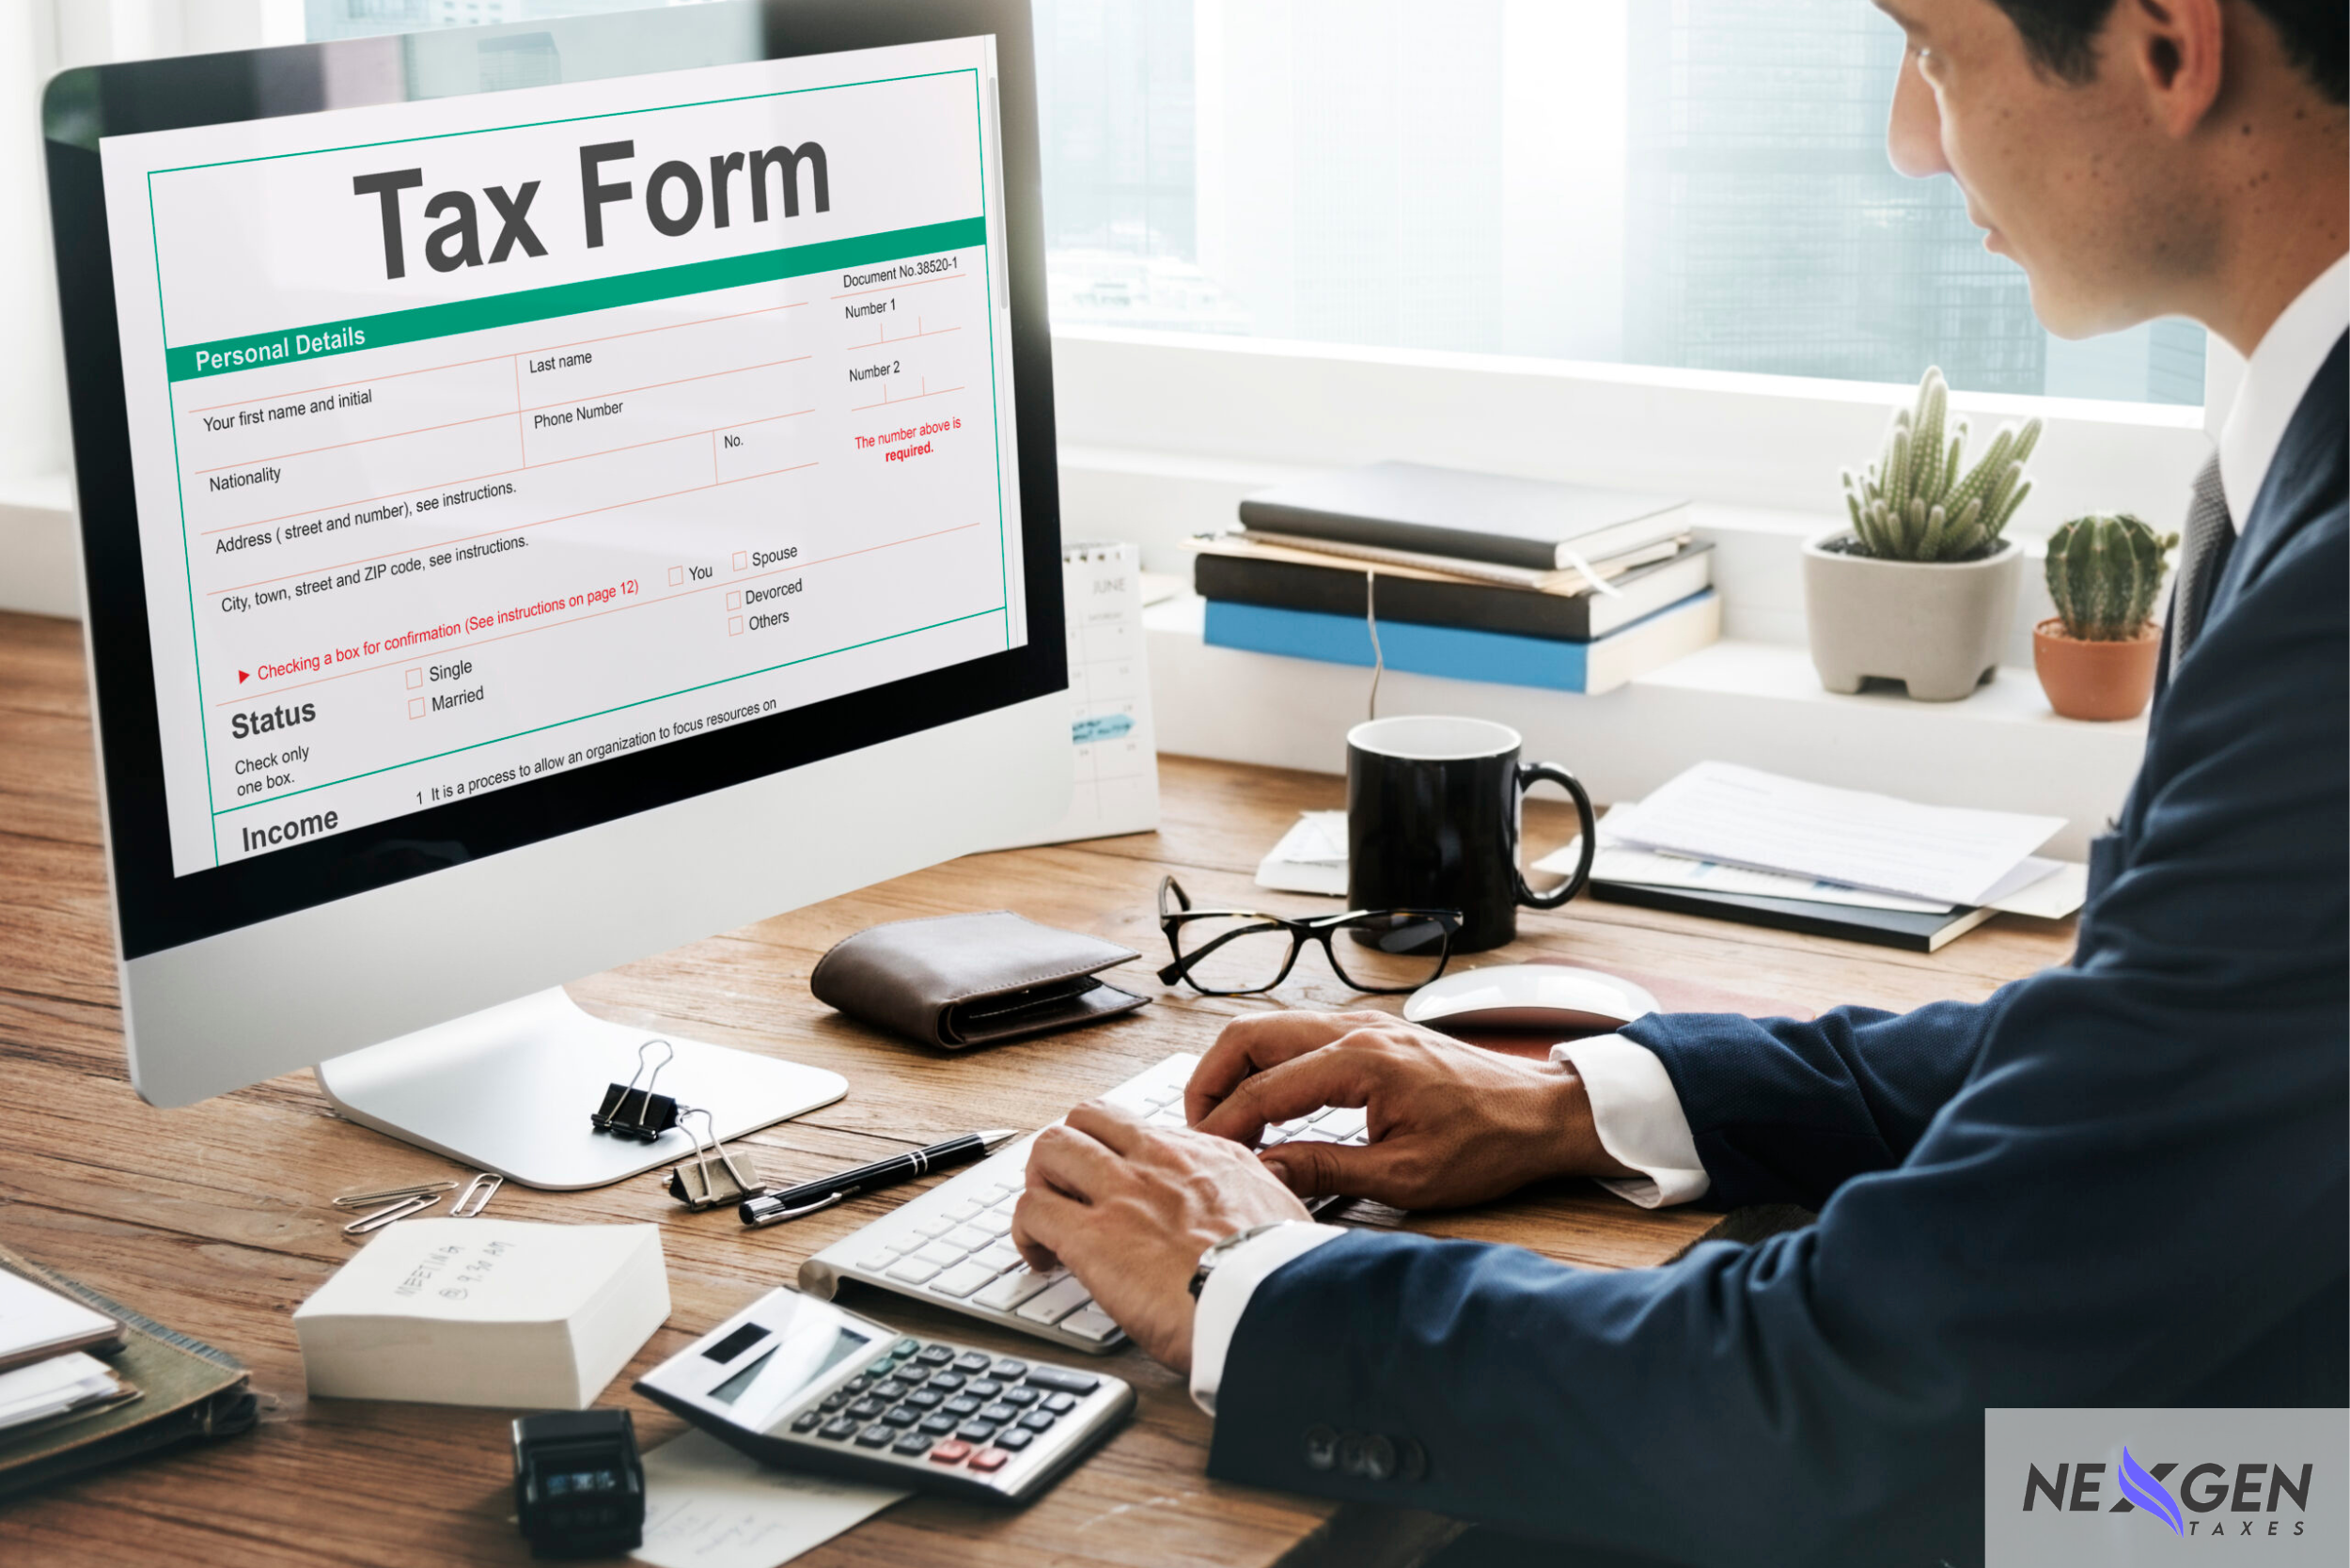 Tax Credits Claim Return Deduction Refund Concept branded image